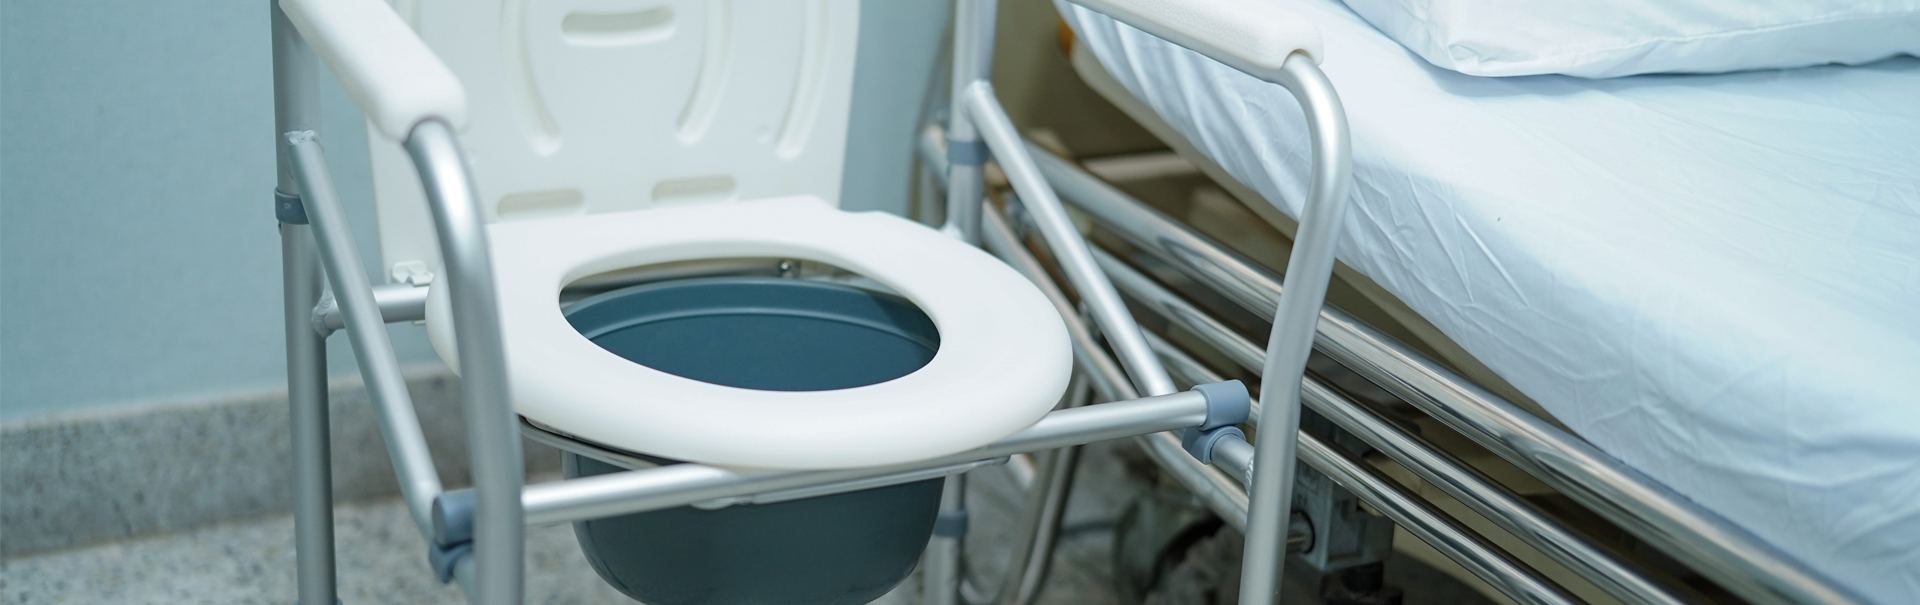 Commode Chair-YK4120, INTCO Wheelchair, INTCO Commode Chair